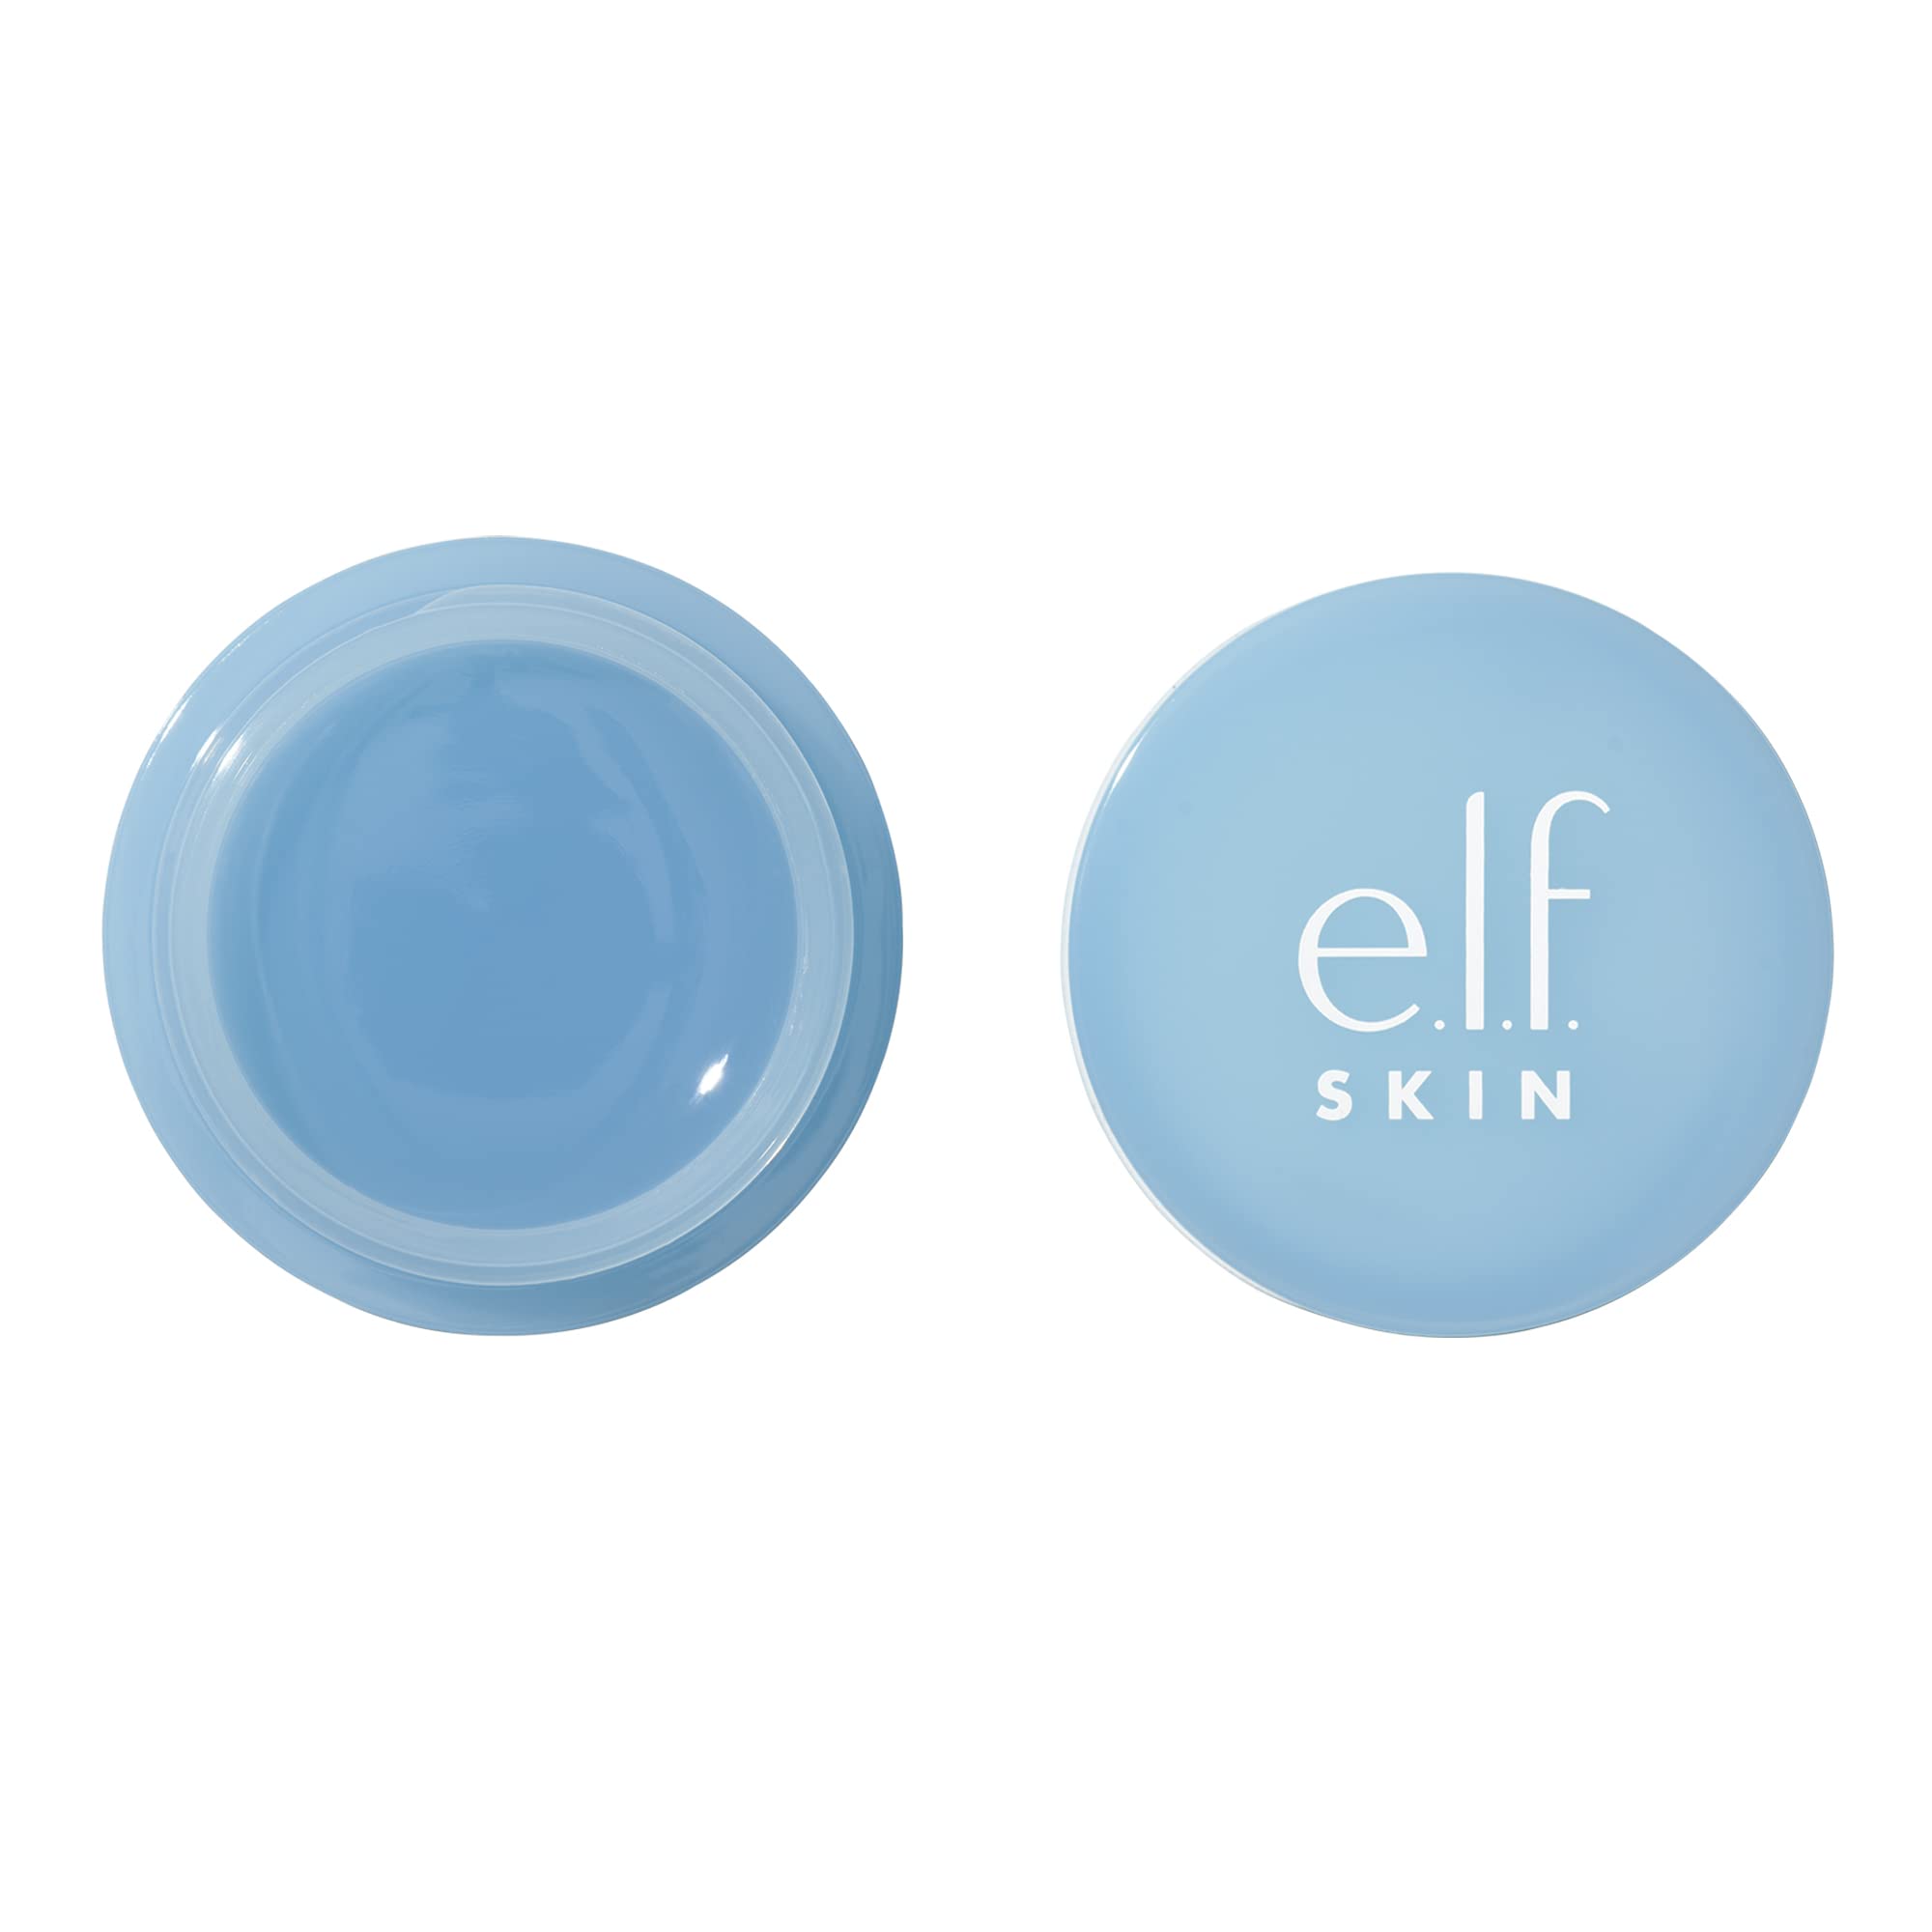 e.l.f. SKIN Holy Hydration! Lip Mask, Hydrating Lip Mask For A Softer & Smoother Pout, Infused With Hyaluronic Acid, Non-Sticky, Vegan & Cruelty-Free